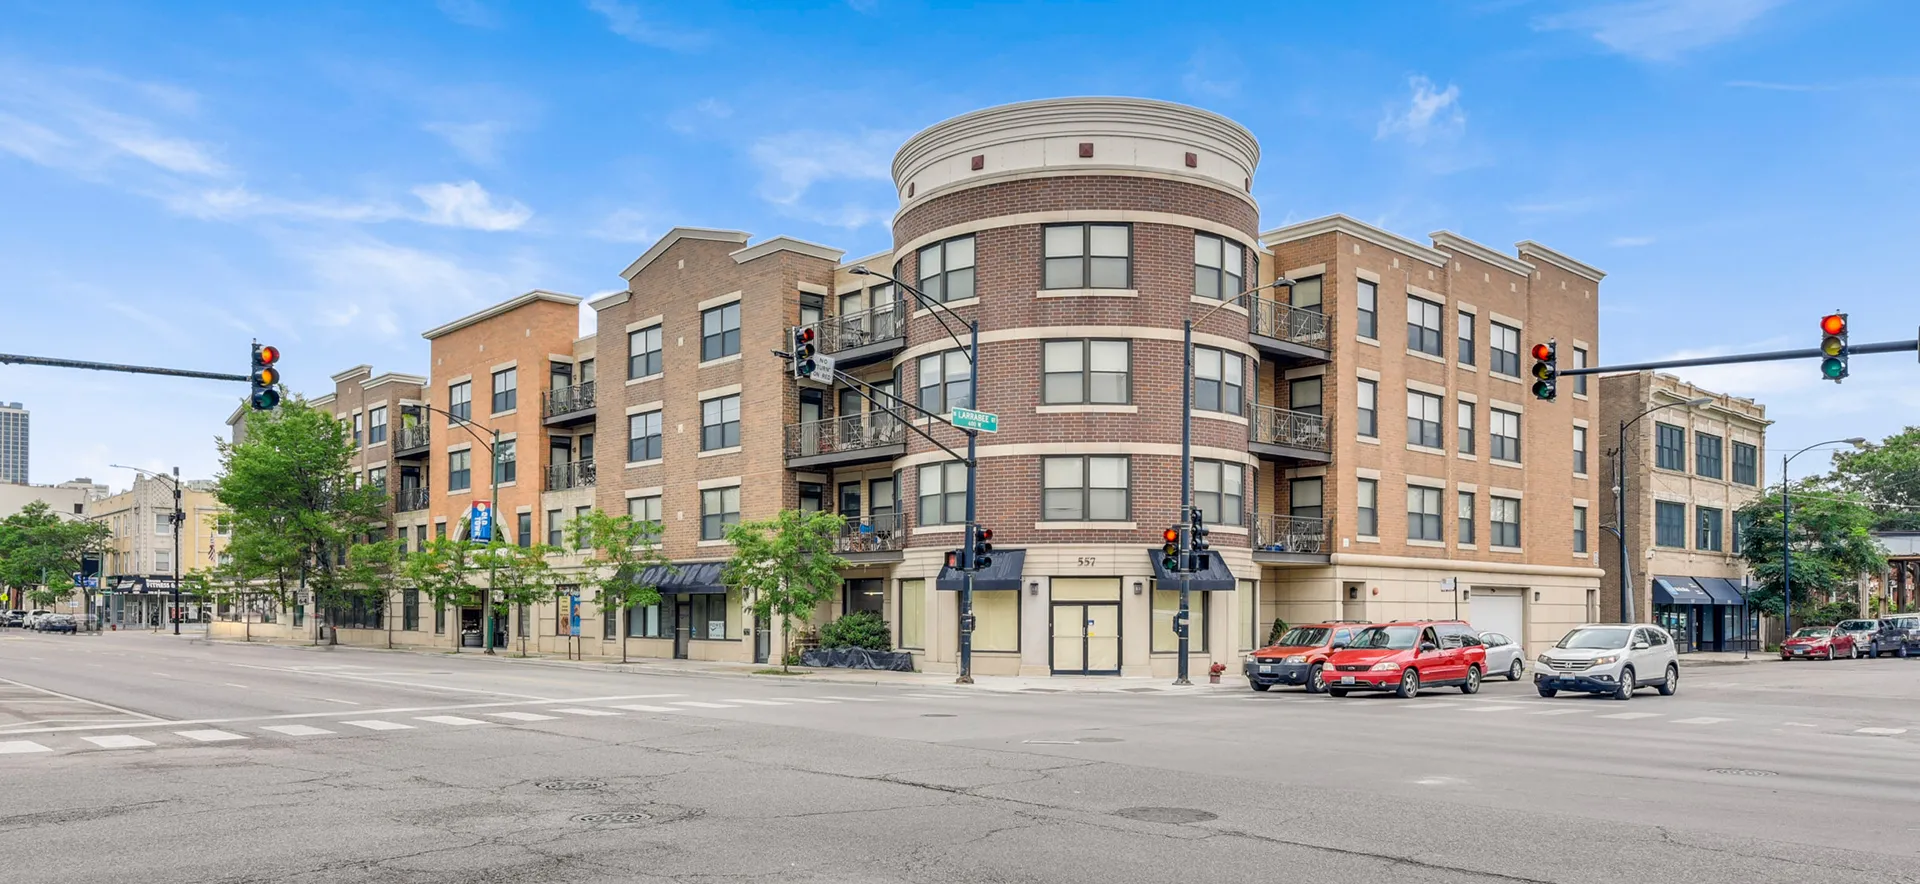 Affinity on North Avenue Apartments